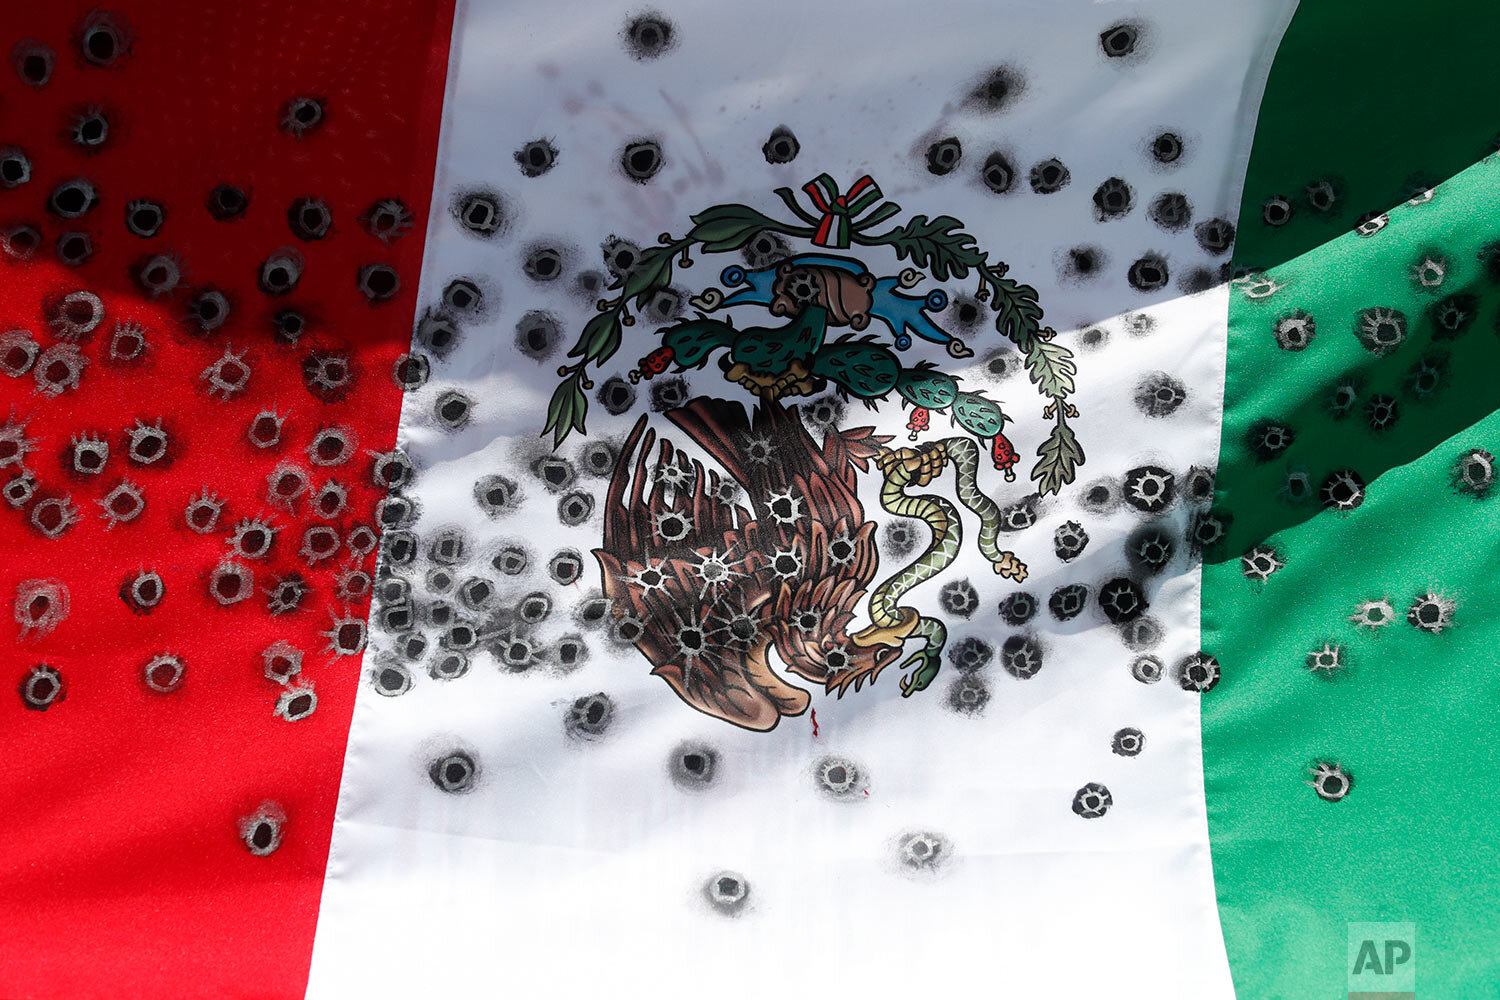  An upside-down Mexican flag, modified to look like it is riven with bullet holes, is carried by members of the LeBaron family during a march against violence called "Walk for Peace," on the road between Tres Marias and Mexico City, Friday, Jan. 24, 